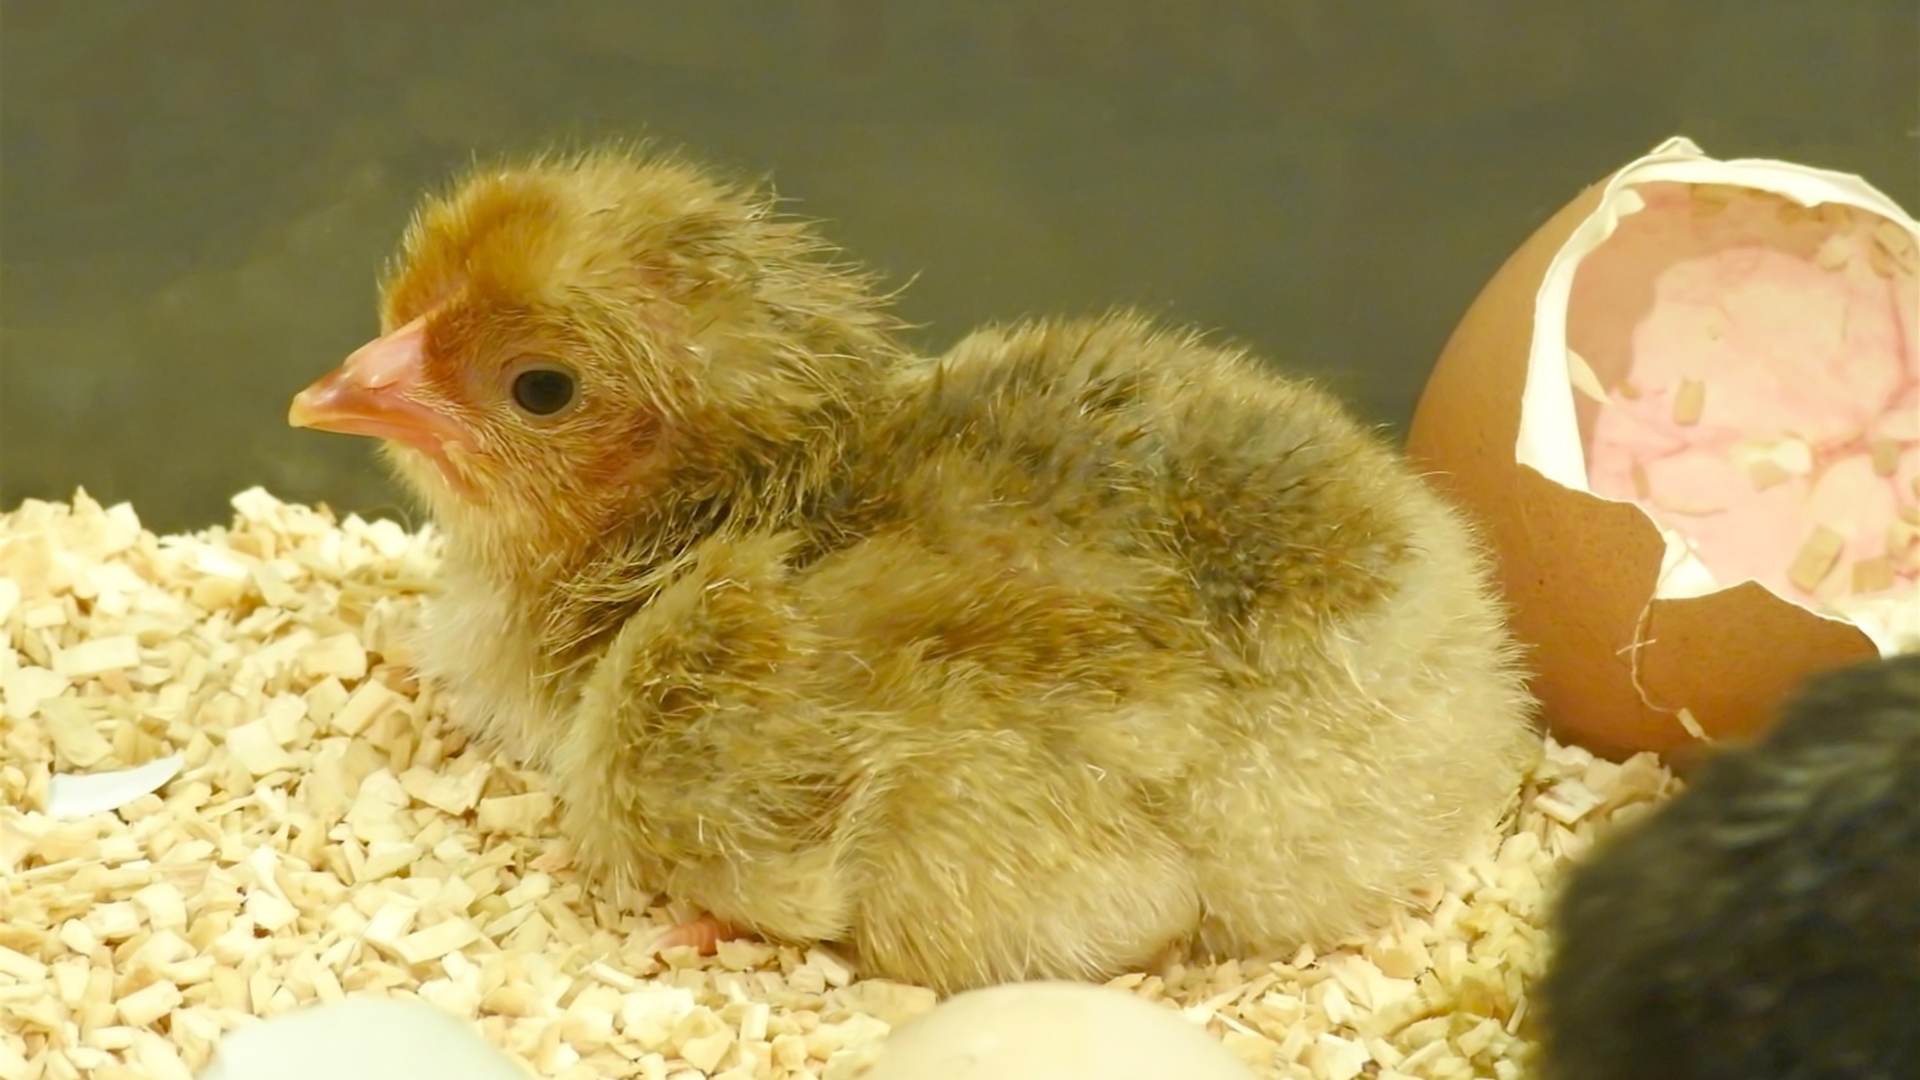 Why don’t chicks hatch?